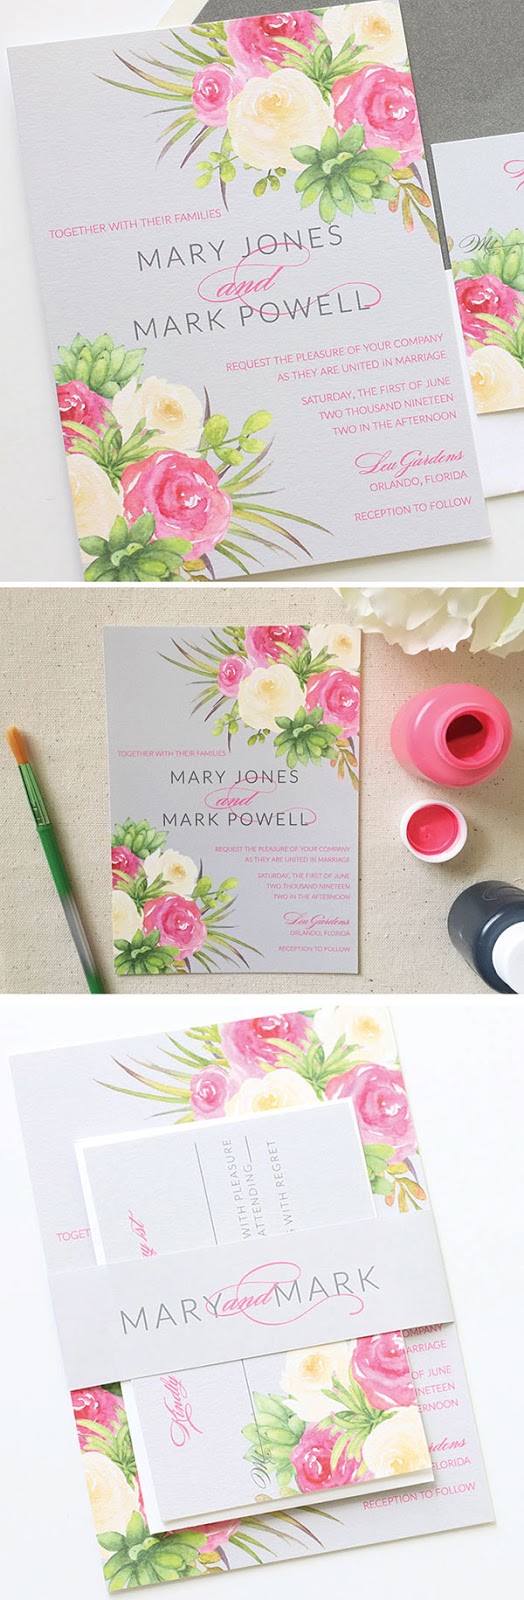 Blush Paperie: Flower Watercolor Wedding Invitation